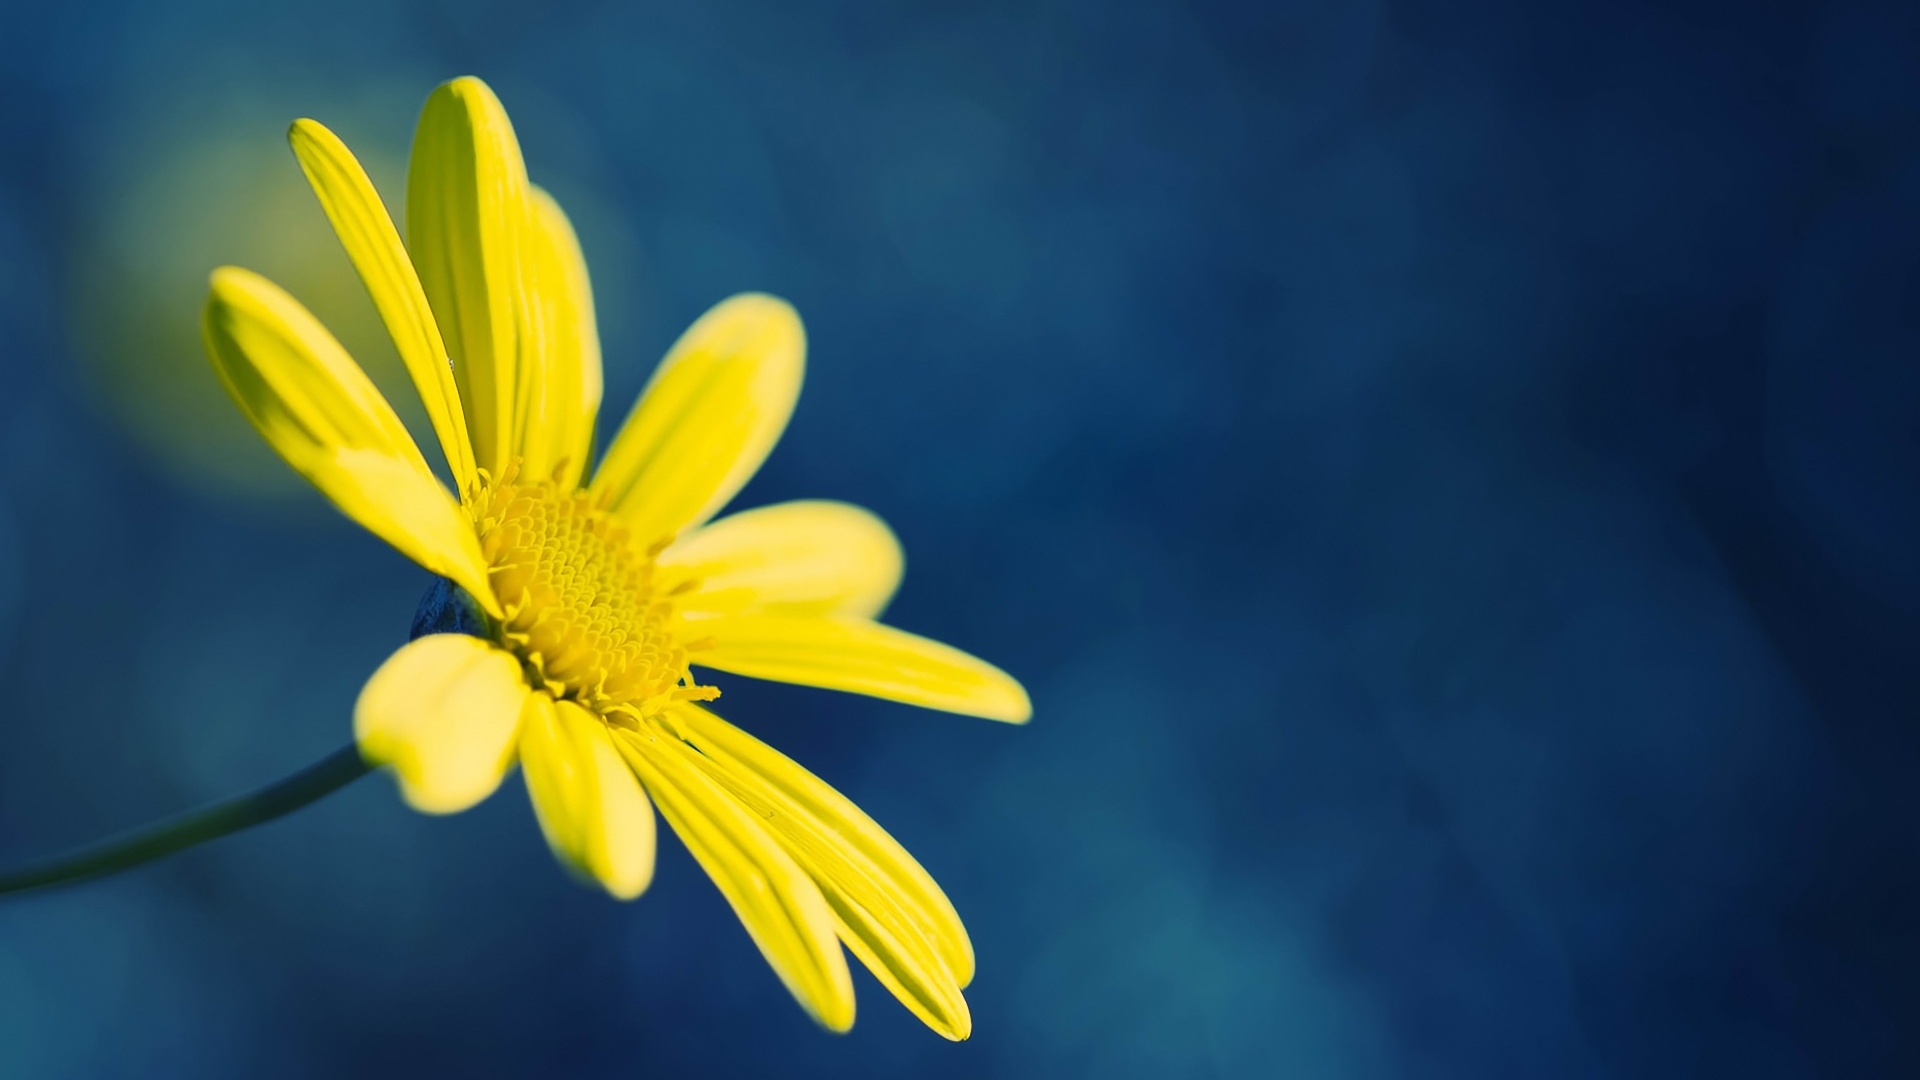 Yellow Flower on Blue Background desktop PC and Mac wallpaper